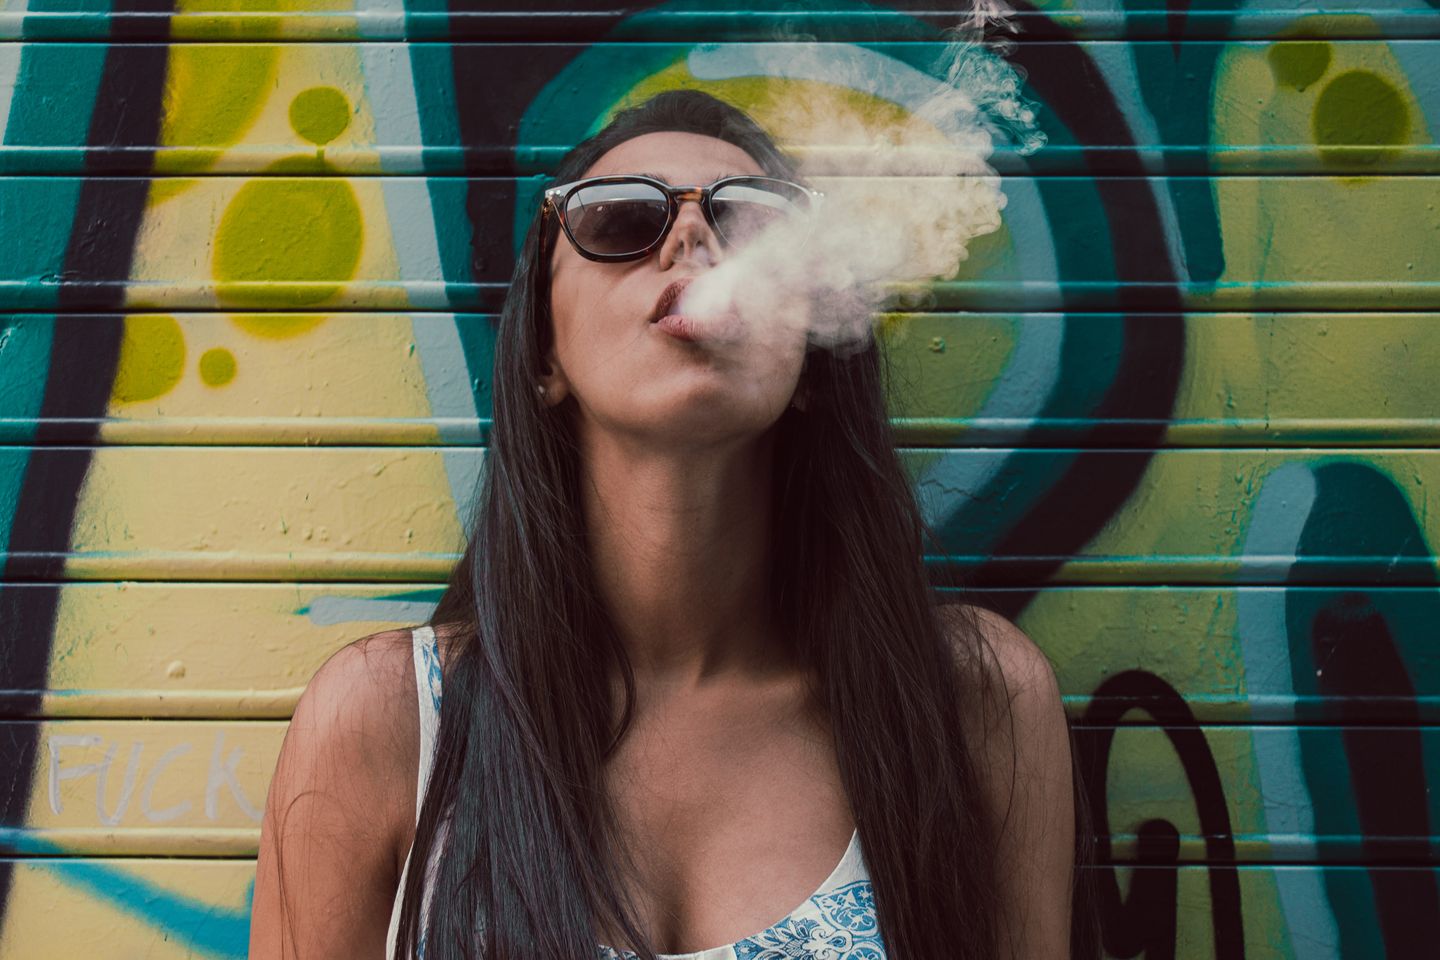 10 Of the best places to smoke weed with friends 